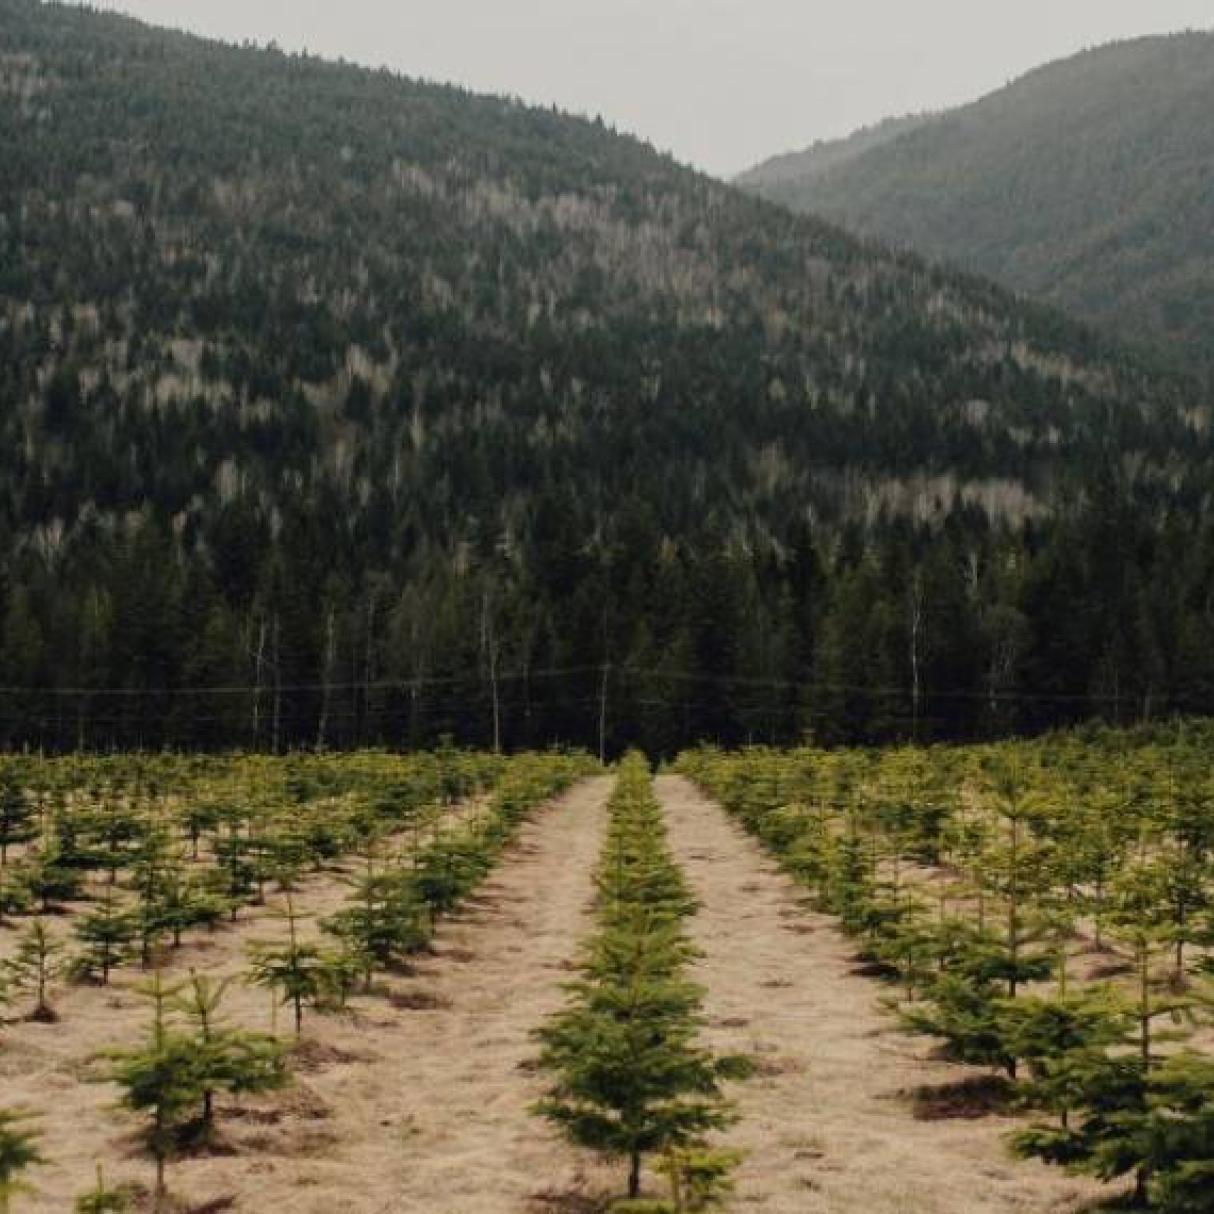 Many rows of planted tree saplings for forestry